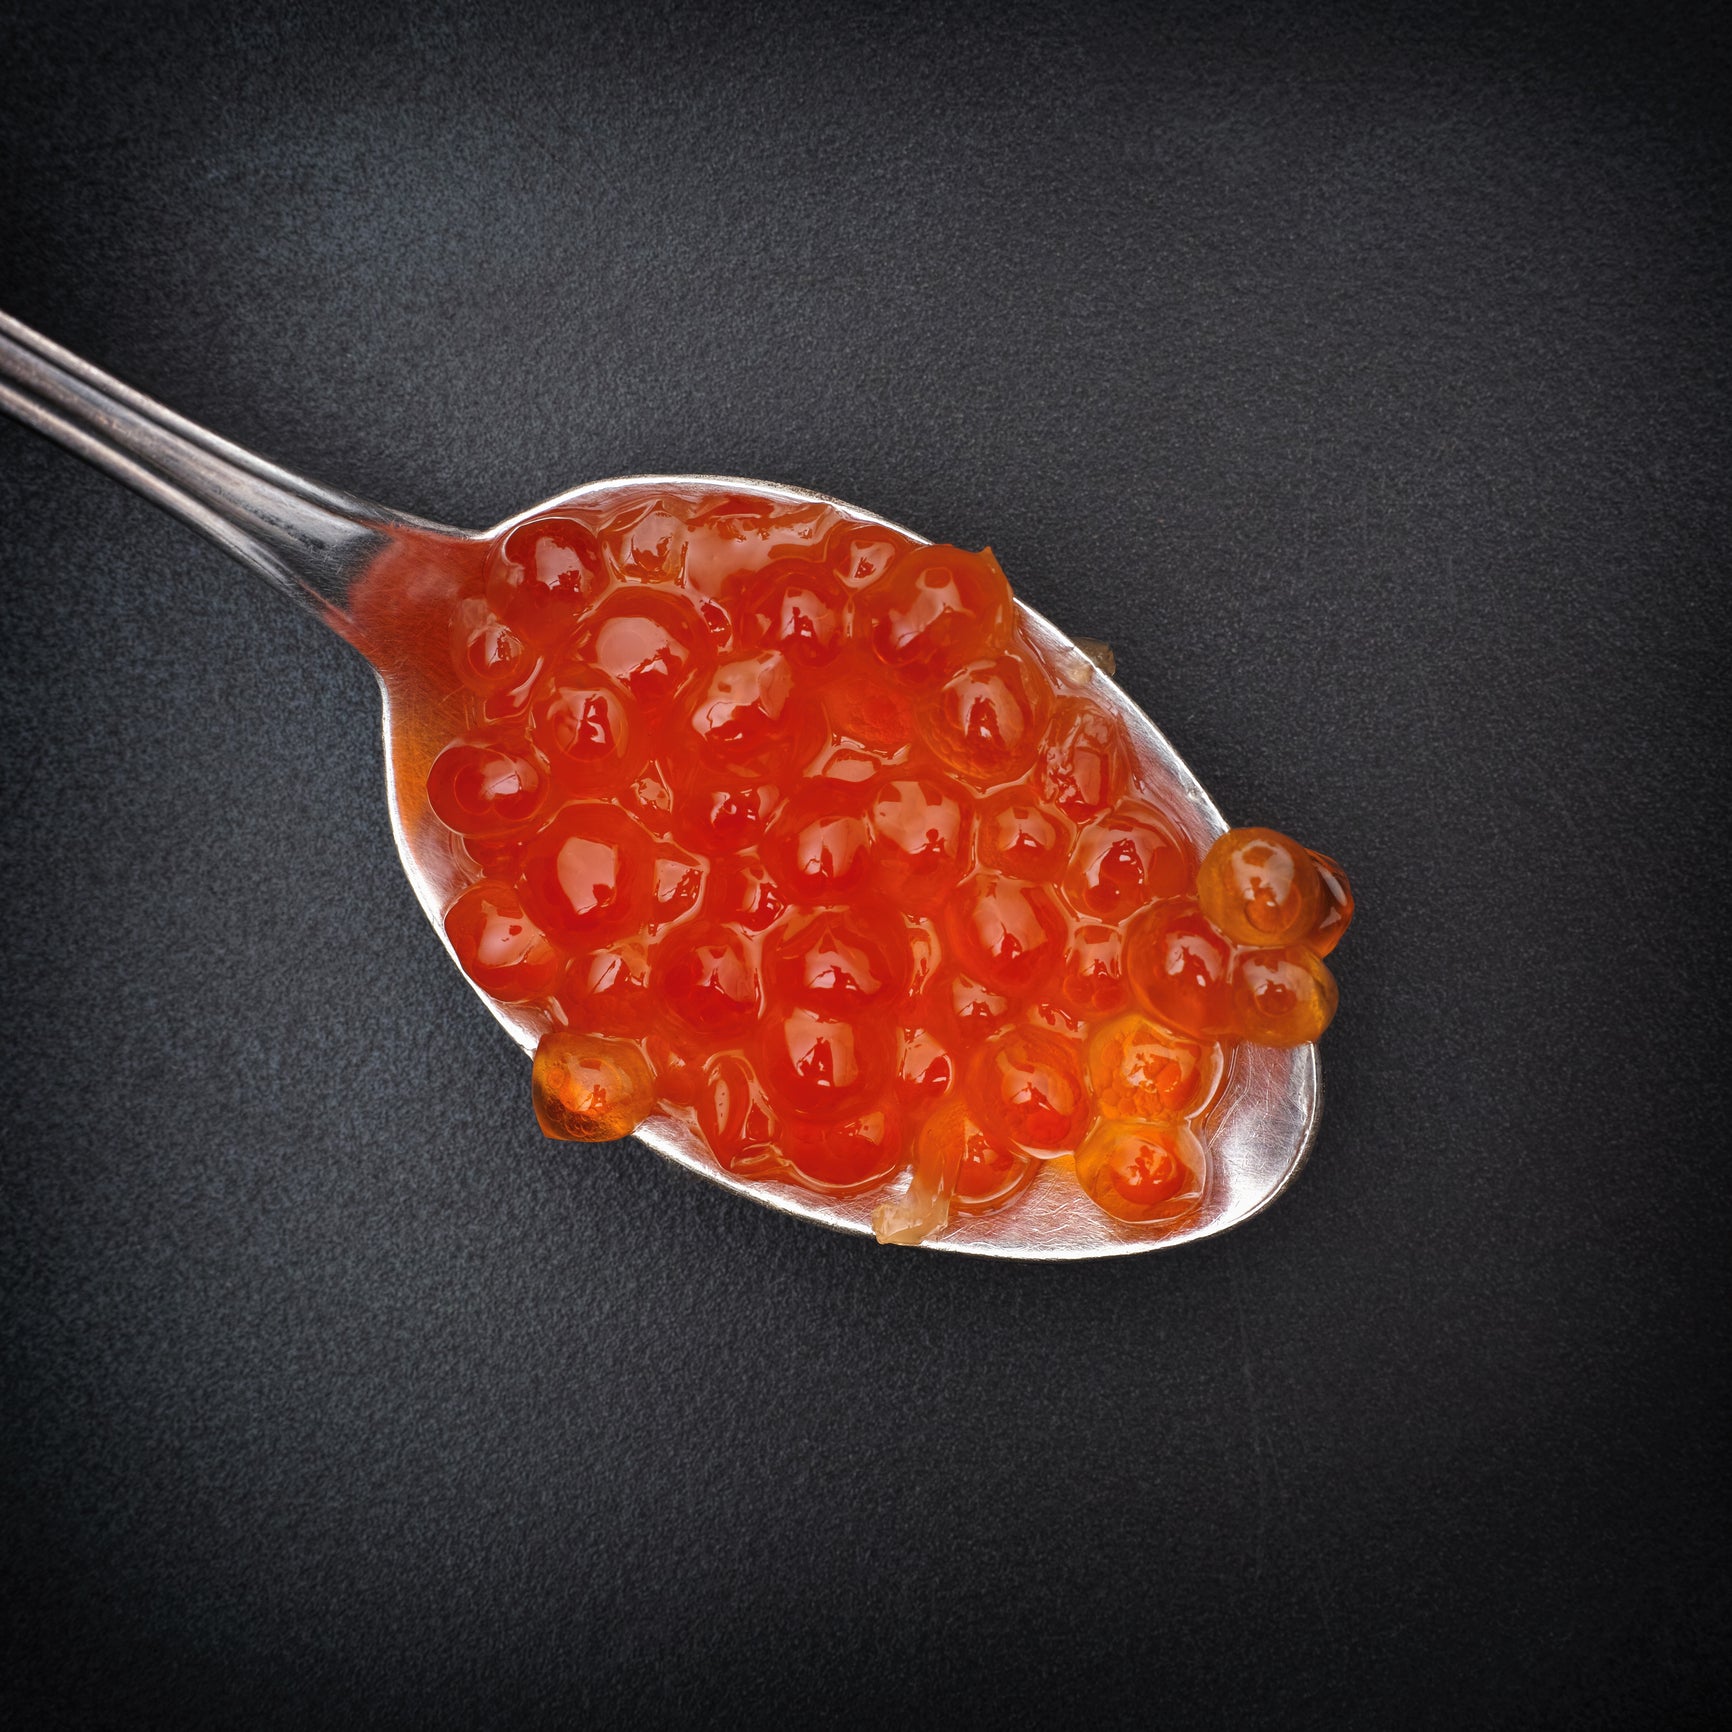 High-quality red caviar in a glass jar with a silver spoon